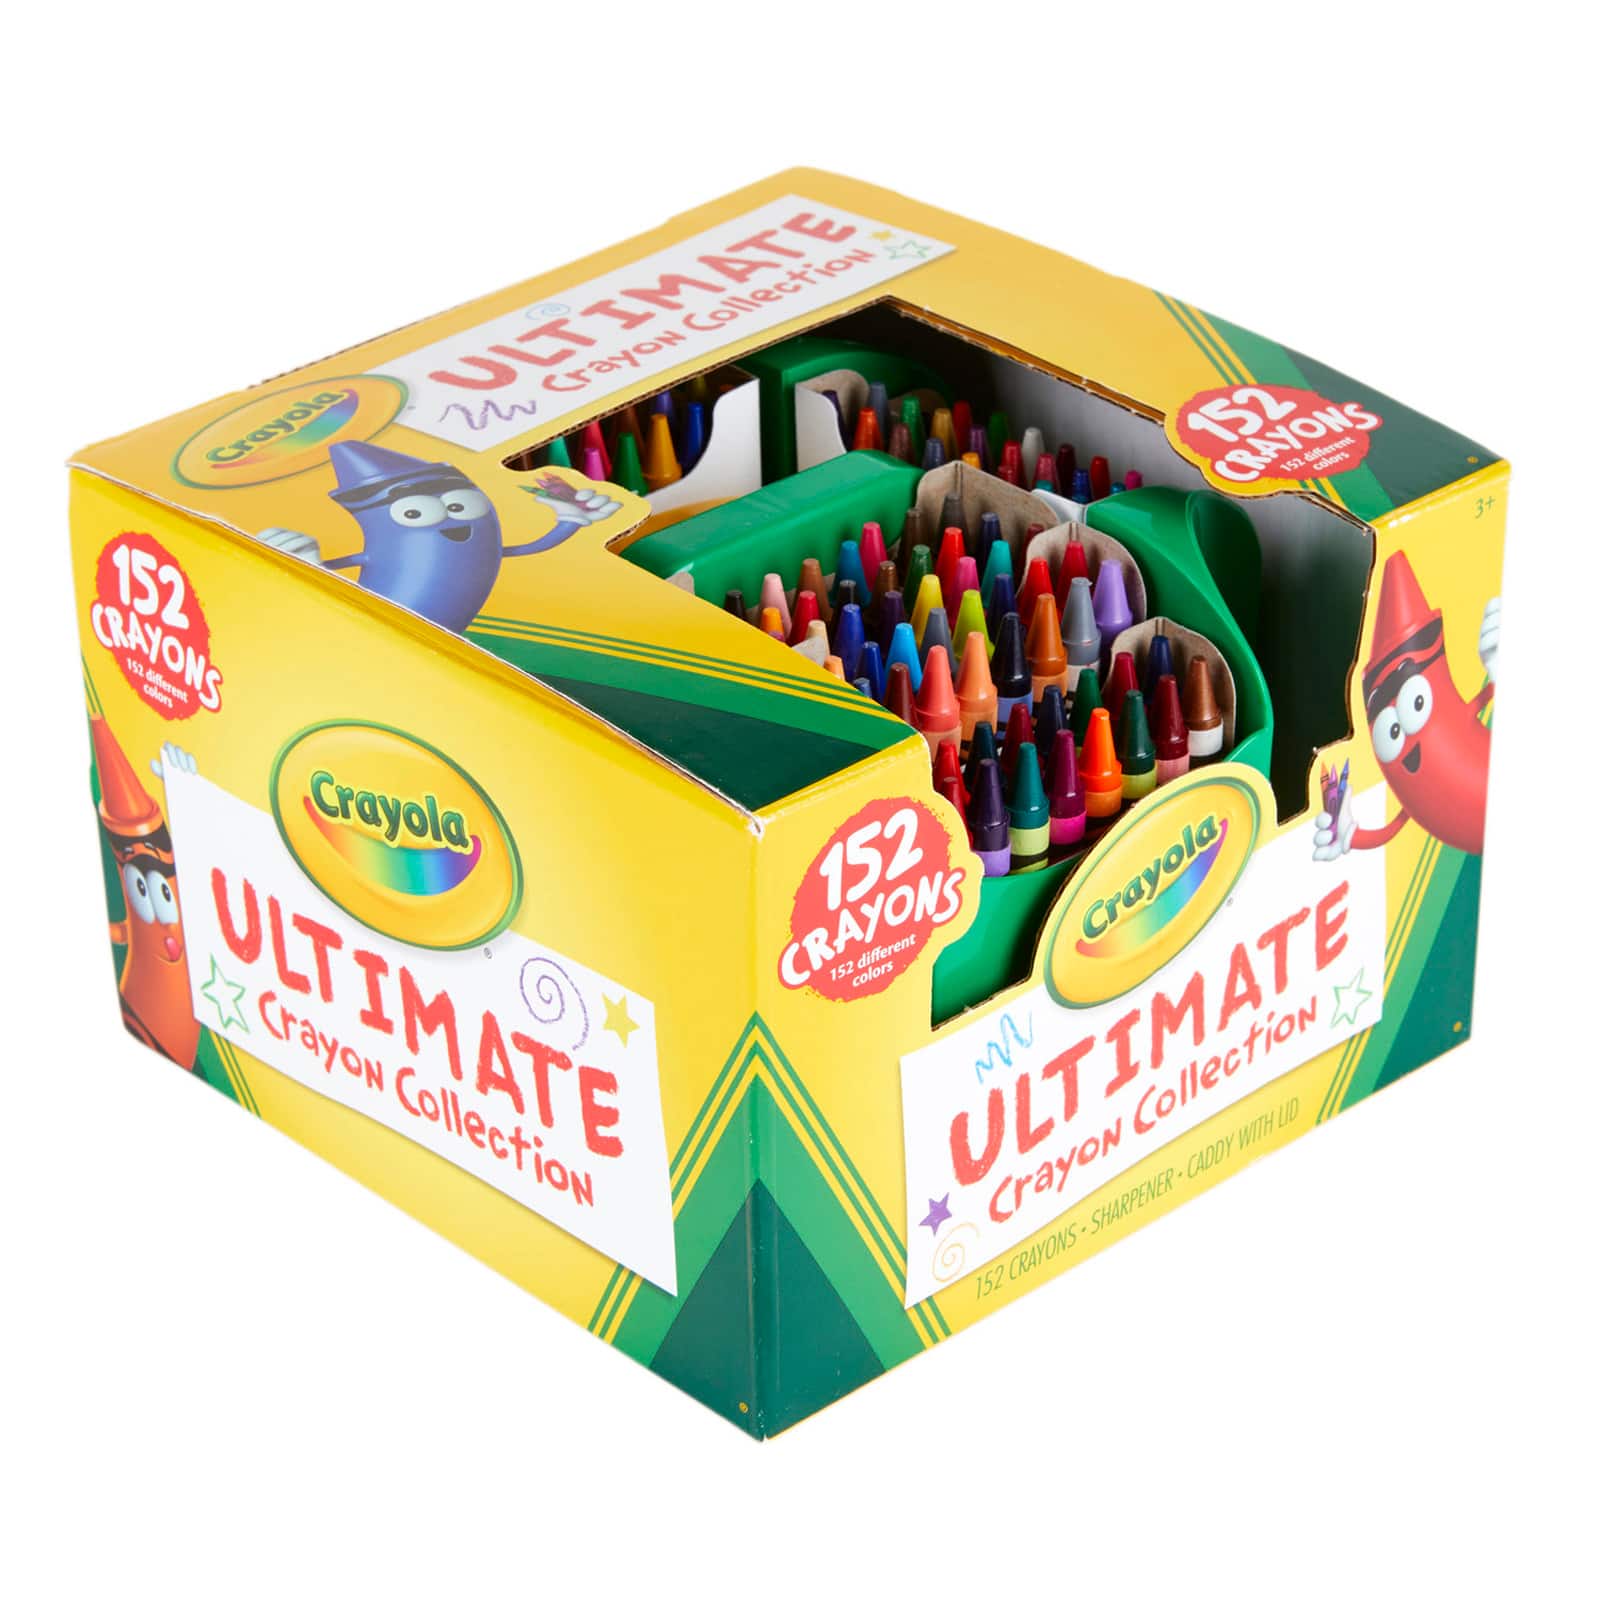 Crayola Ultimate Crayon Box Collection (152ct), Bulk Kids Crayon Caddy,  Classic & Glitter Crayons, Gifts, Ages